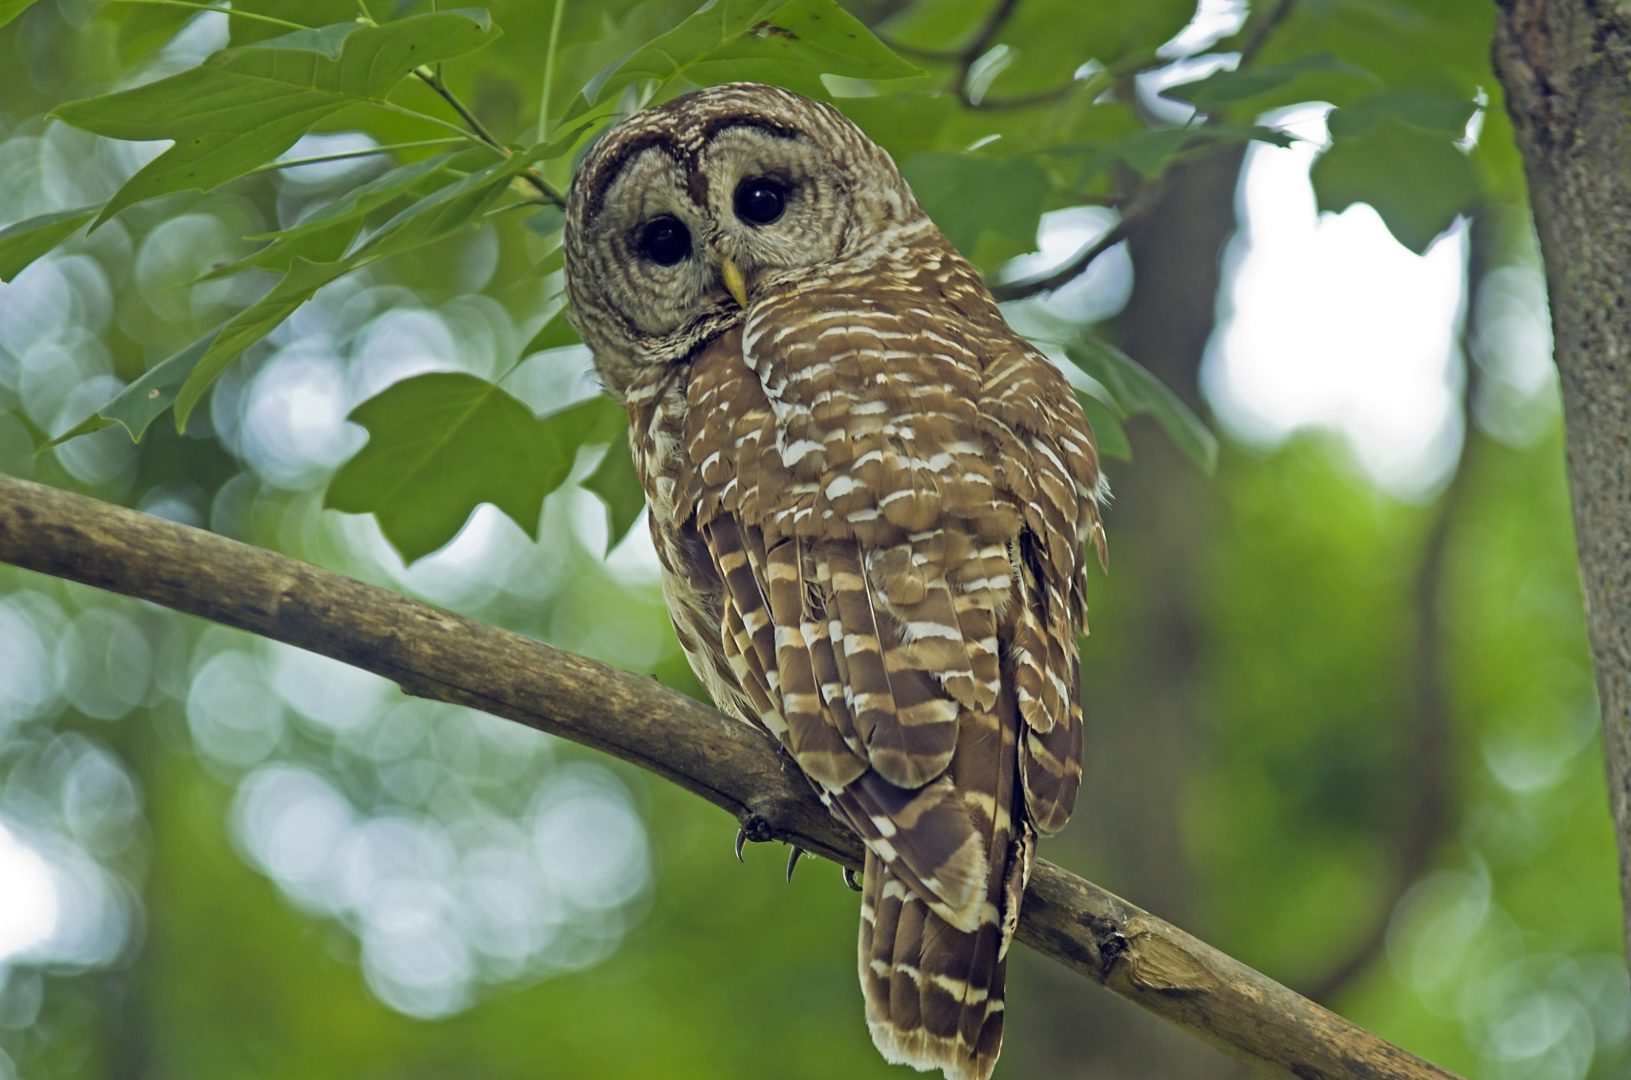 A spotted owl turns to face the camera as it sits on a treebranch